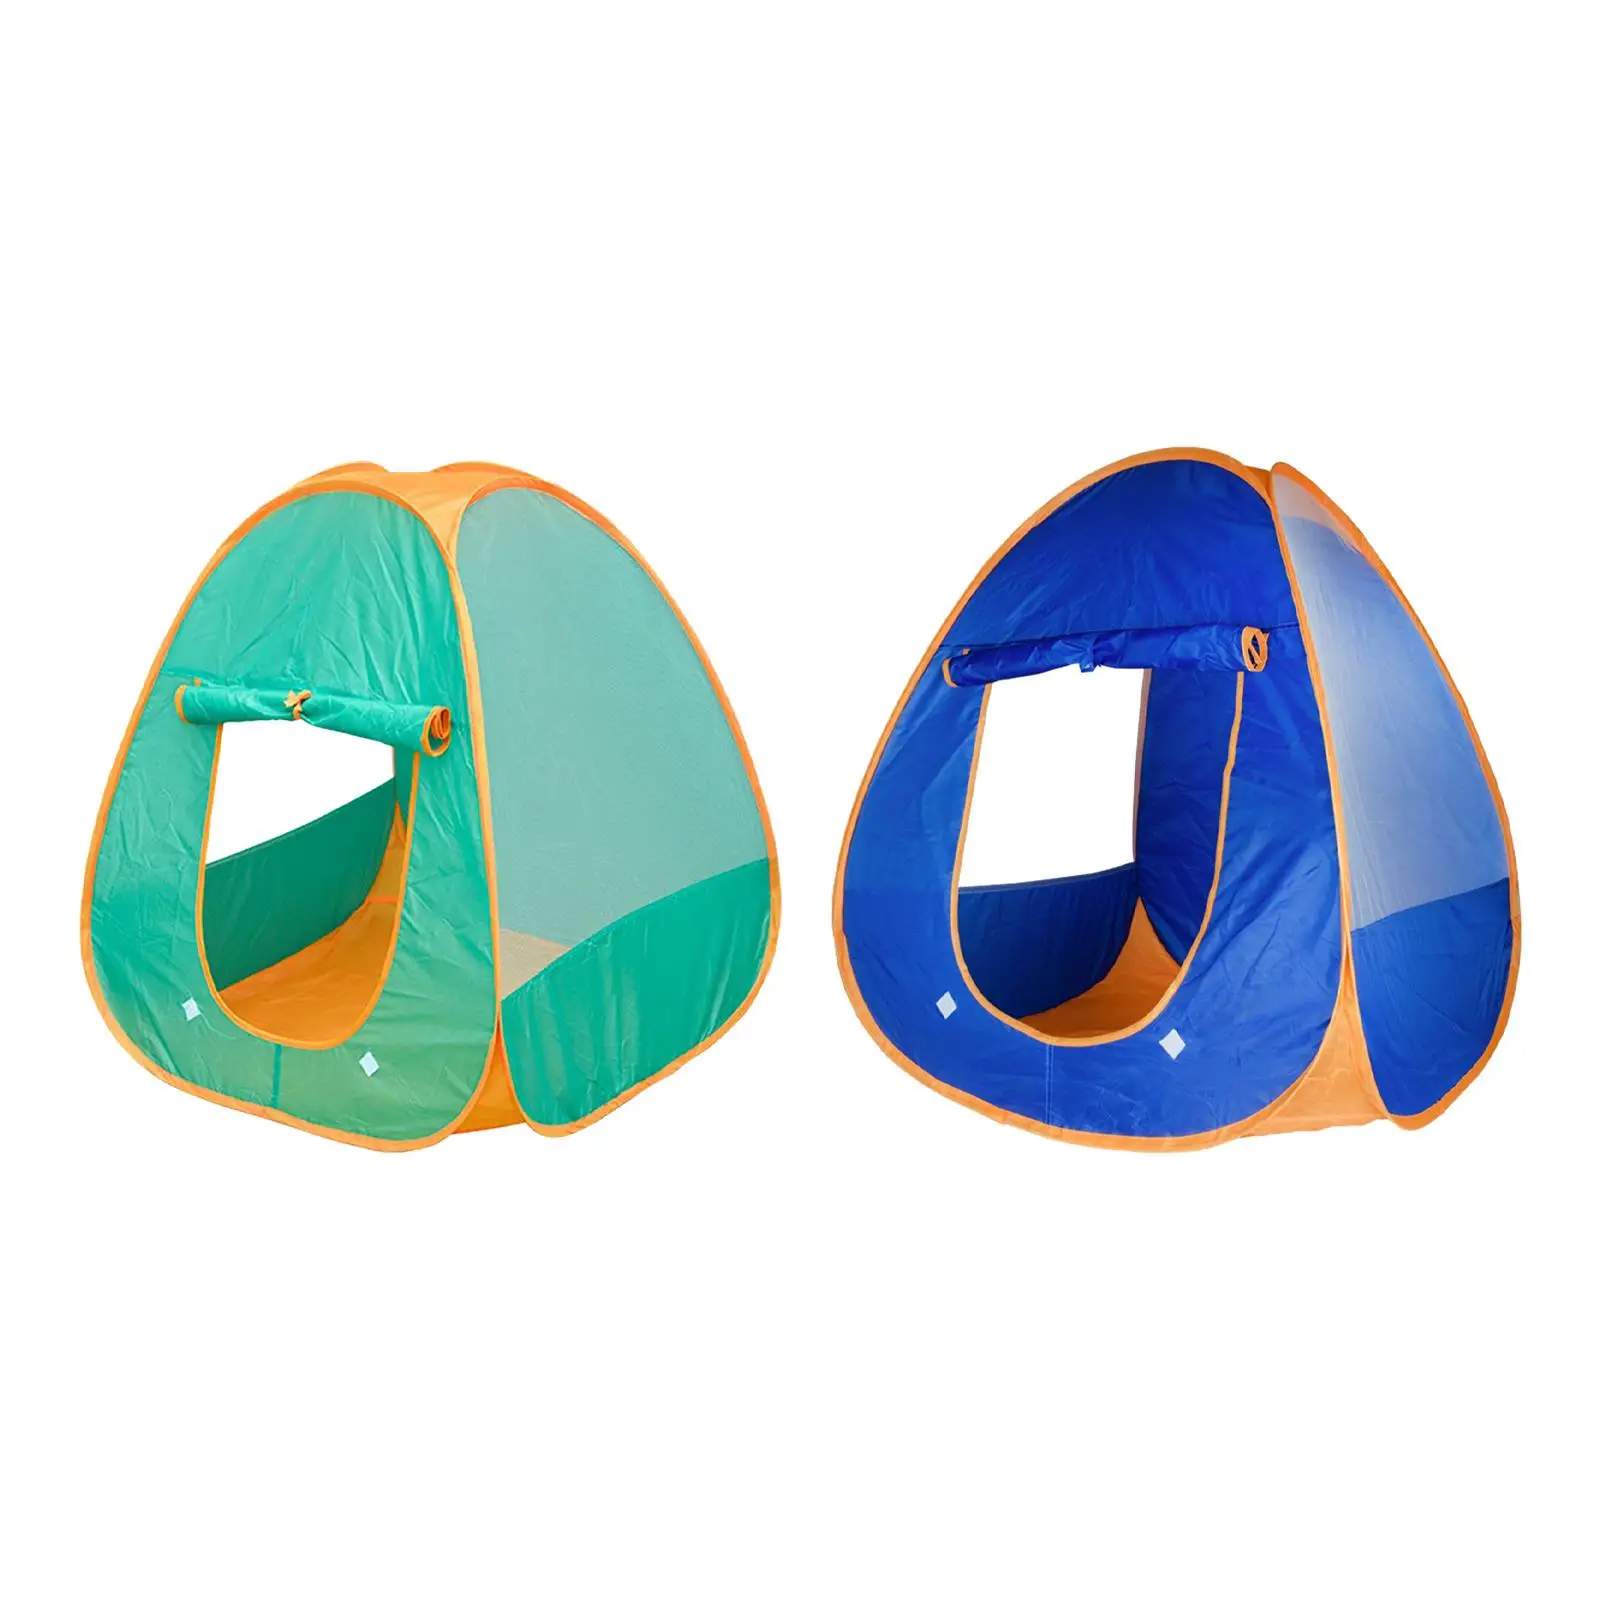 Kids Play Tent Foldable Portable Pretend Play Birthday Gifts for Girls Boys Child Room Decor for Game Parties Beach Camping Home